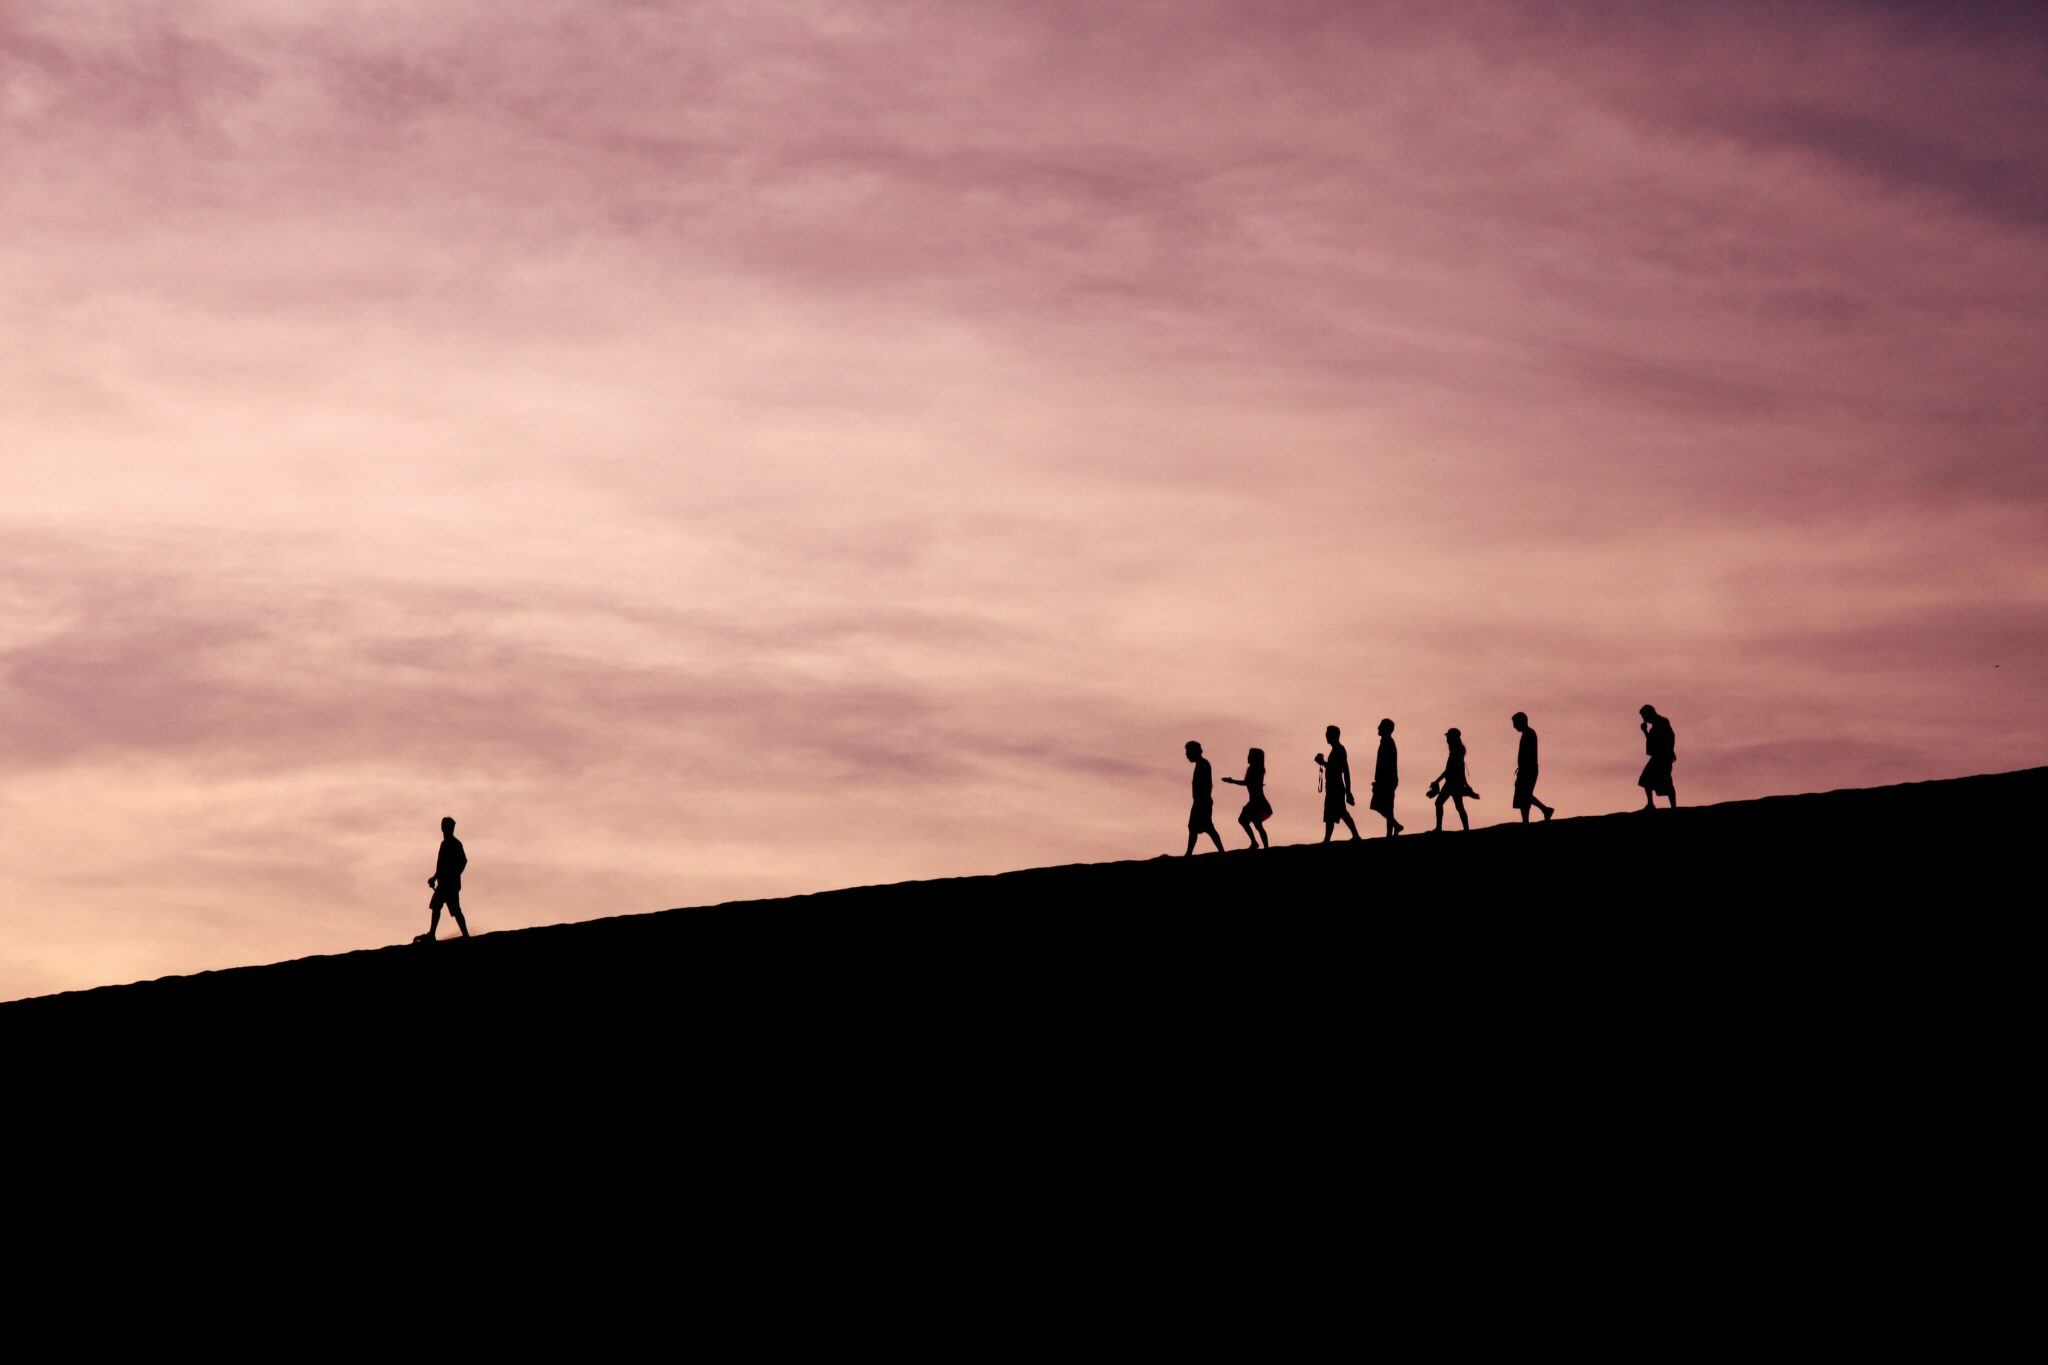 Silhouttes of a figure walking in front of a group of 7 people a few metres behind. The figures are walking down a hill set against a moody purple and orange, cloudy sunset.